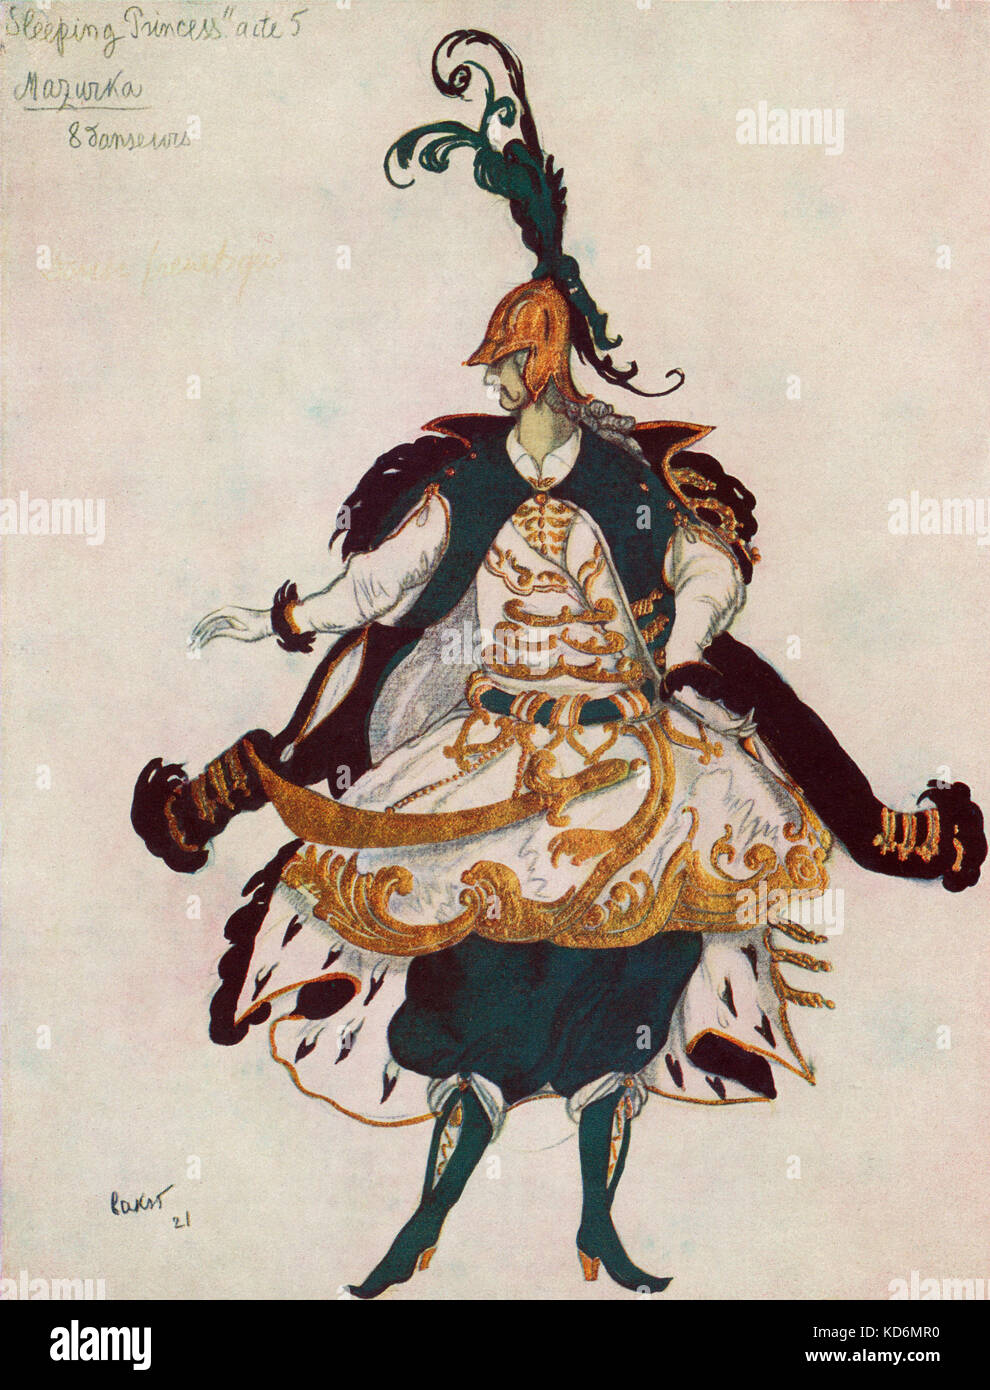 Costume for Mazurka Dancer in ' The Sleeping Princess ', ballet to music by Tchaikovsky with variations by Stravinsky - souvenir programme from Alhambra Theatre London production, with costume designs by Leon Bakst, 1921. (1866-1924) . Tchaikovsky, Russian composer,  7 May 1840 - 6 November 1893. Stravinsky, Russian composer, 17 June 1882 - 6 April 1971. Stock Photo